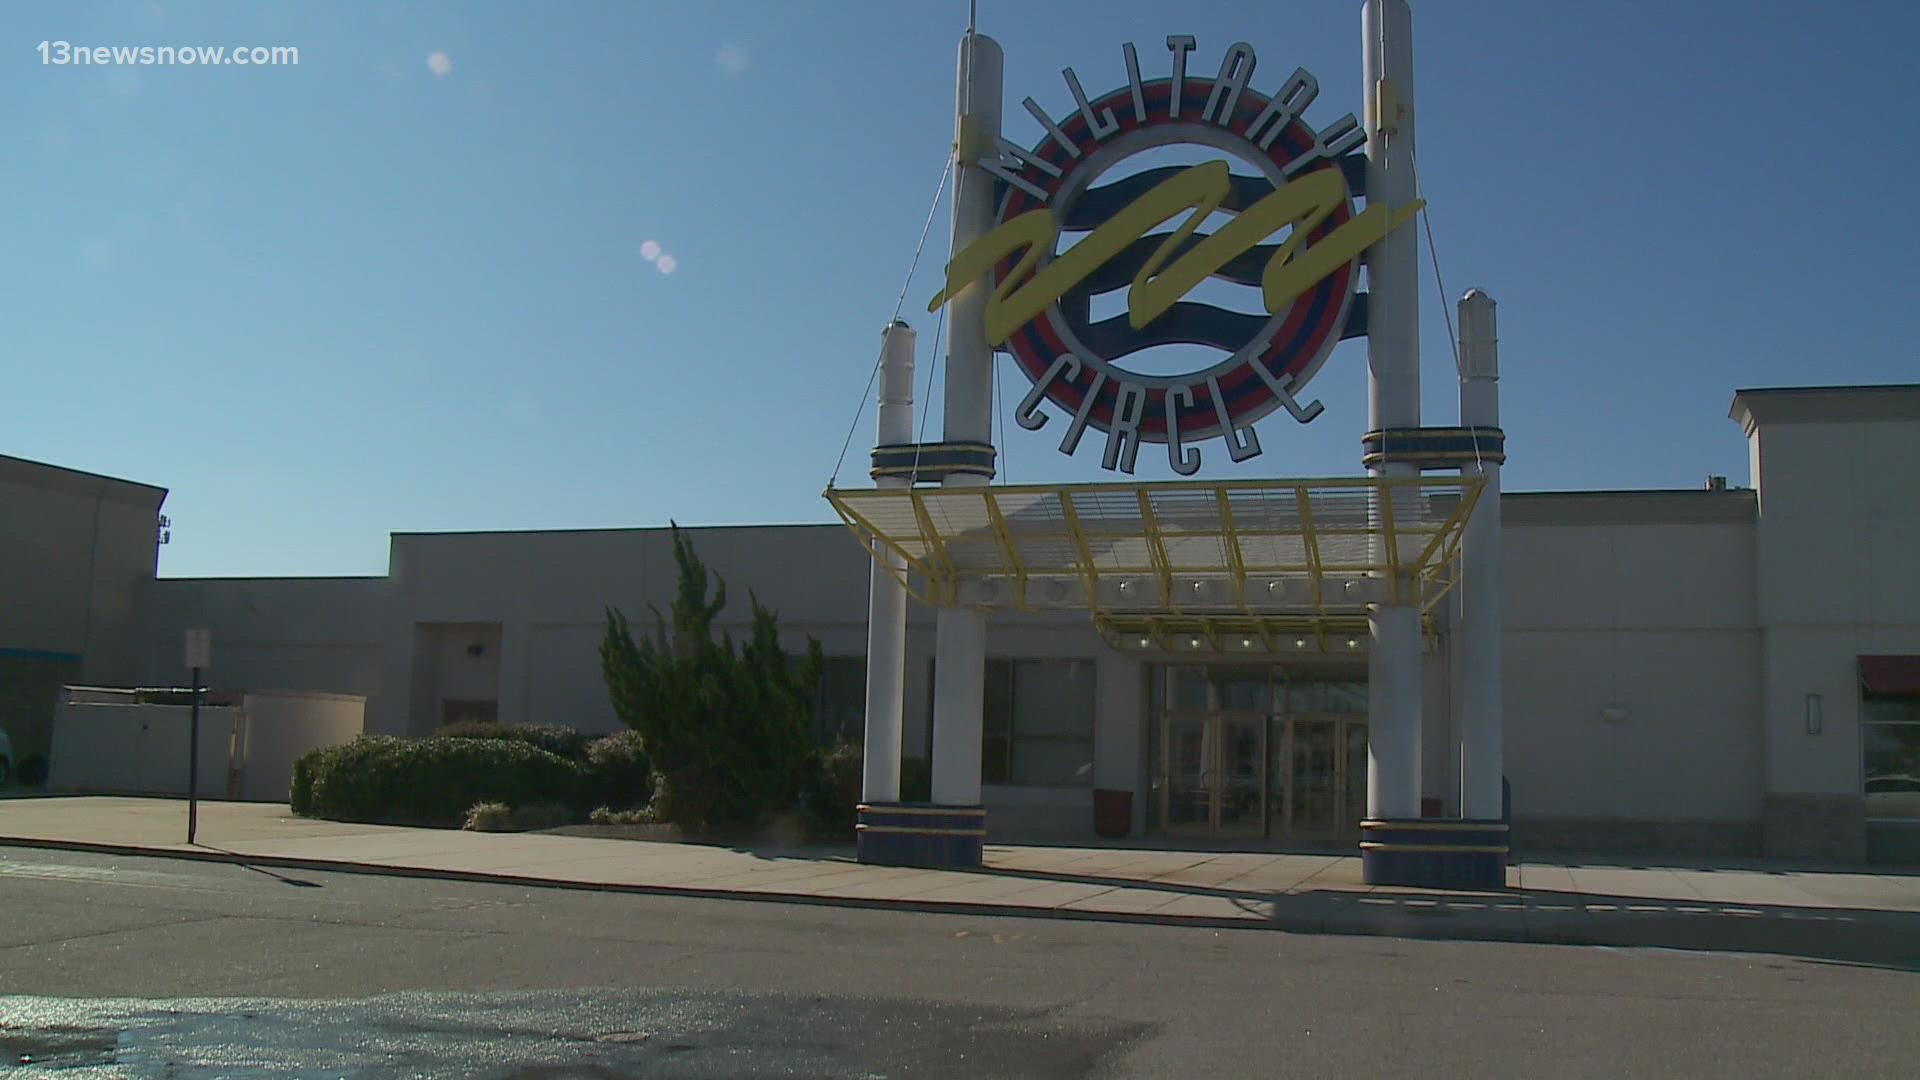 Following years of decline, Military Circle Mall will close at the end of 2022, paving way for future redevelopment in the area.